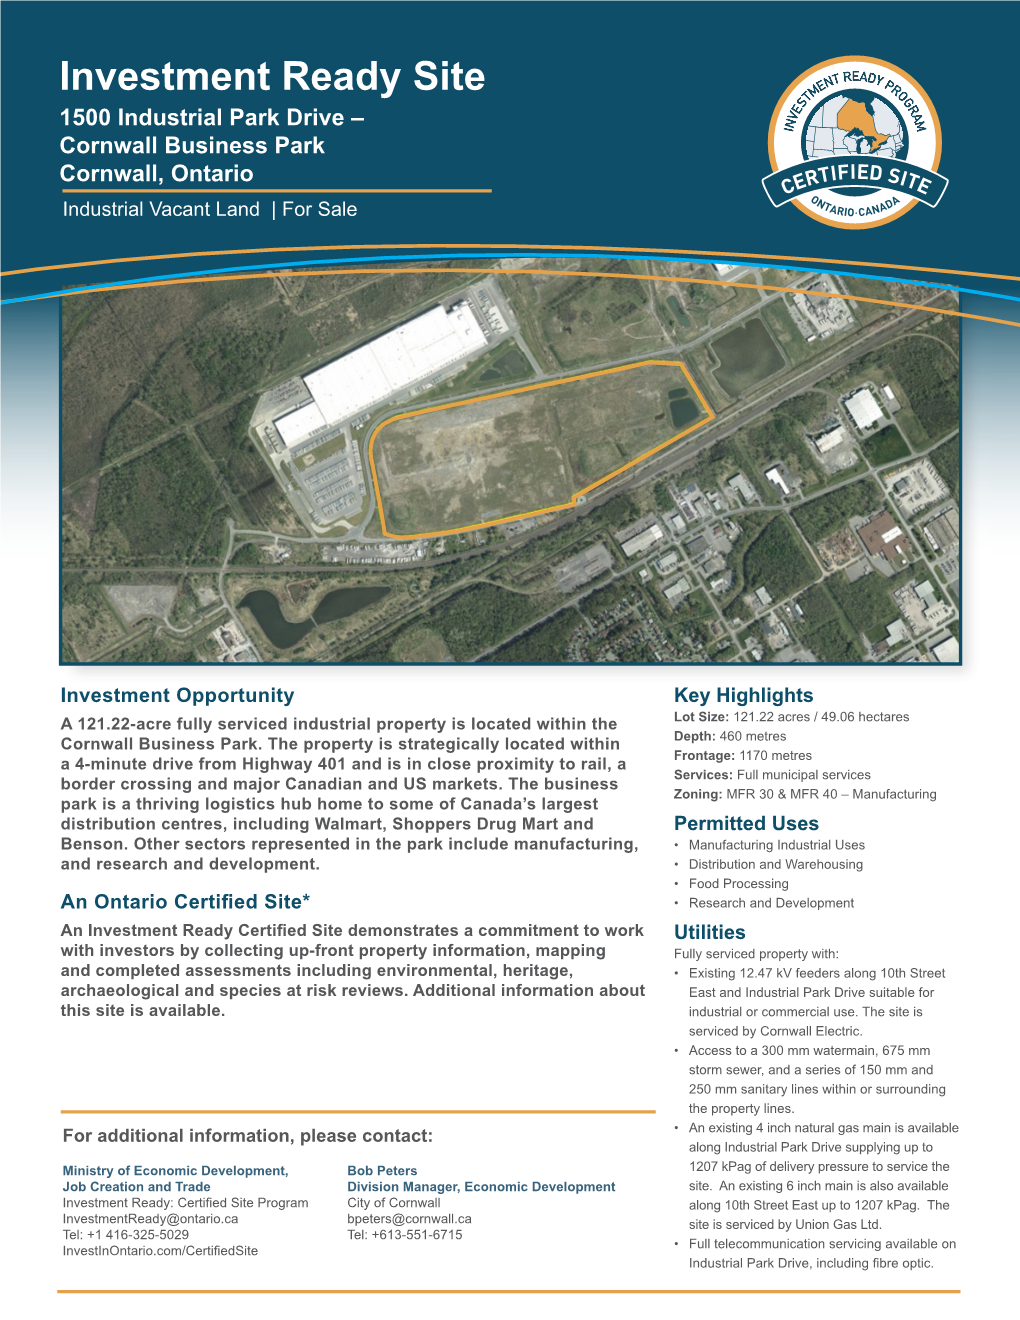 Investment Ready Site: 1500 Industrial Park Drive